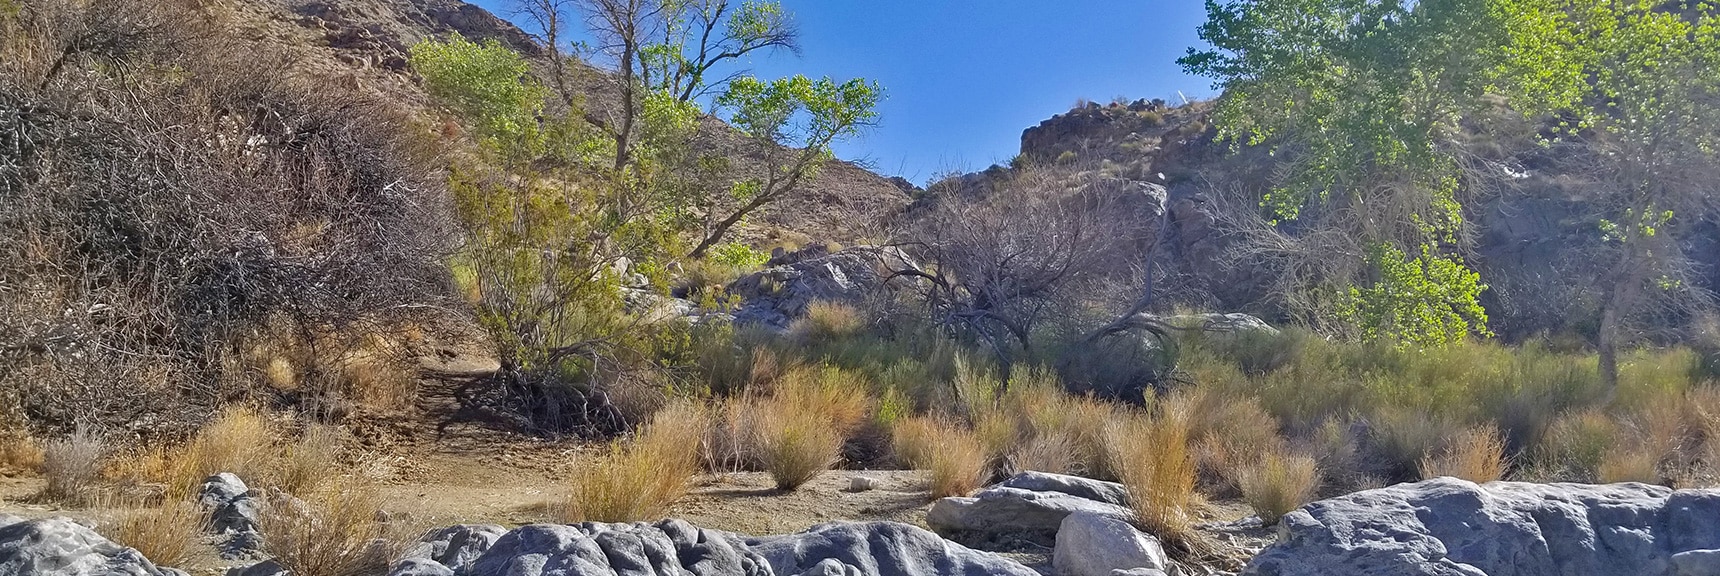 The Springs in Horse Thief Canyon. Unexpected Life in the Desert. | Horse Thief Canyon Loop | Mt. Wilson | Black Mountains | Lake Mead National Recreation Area, Arizona